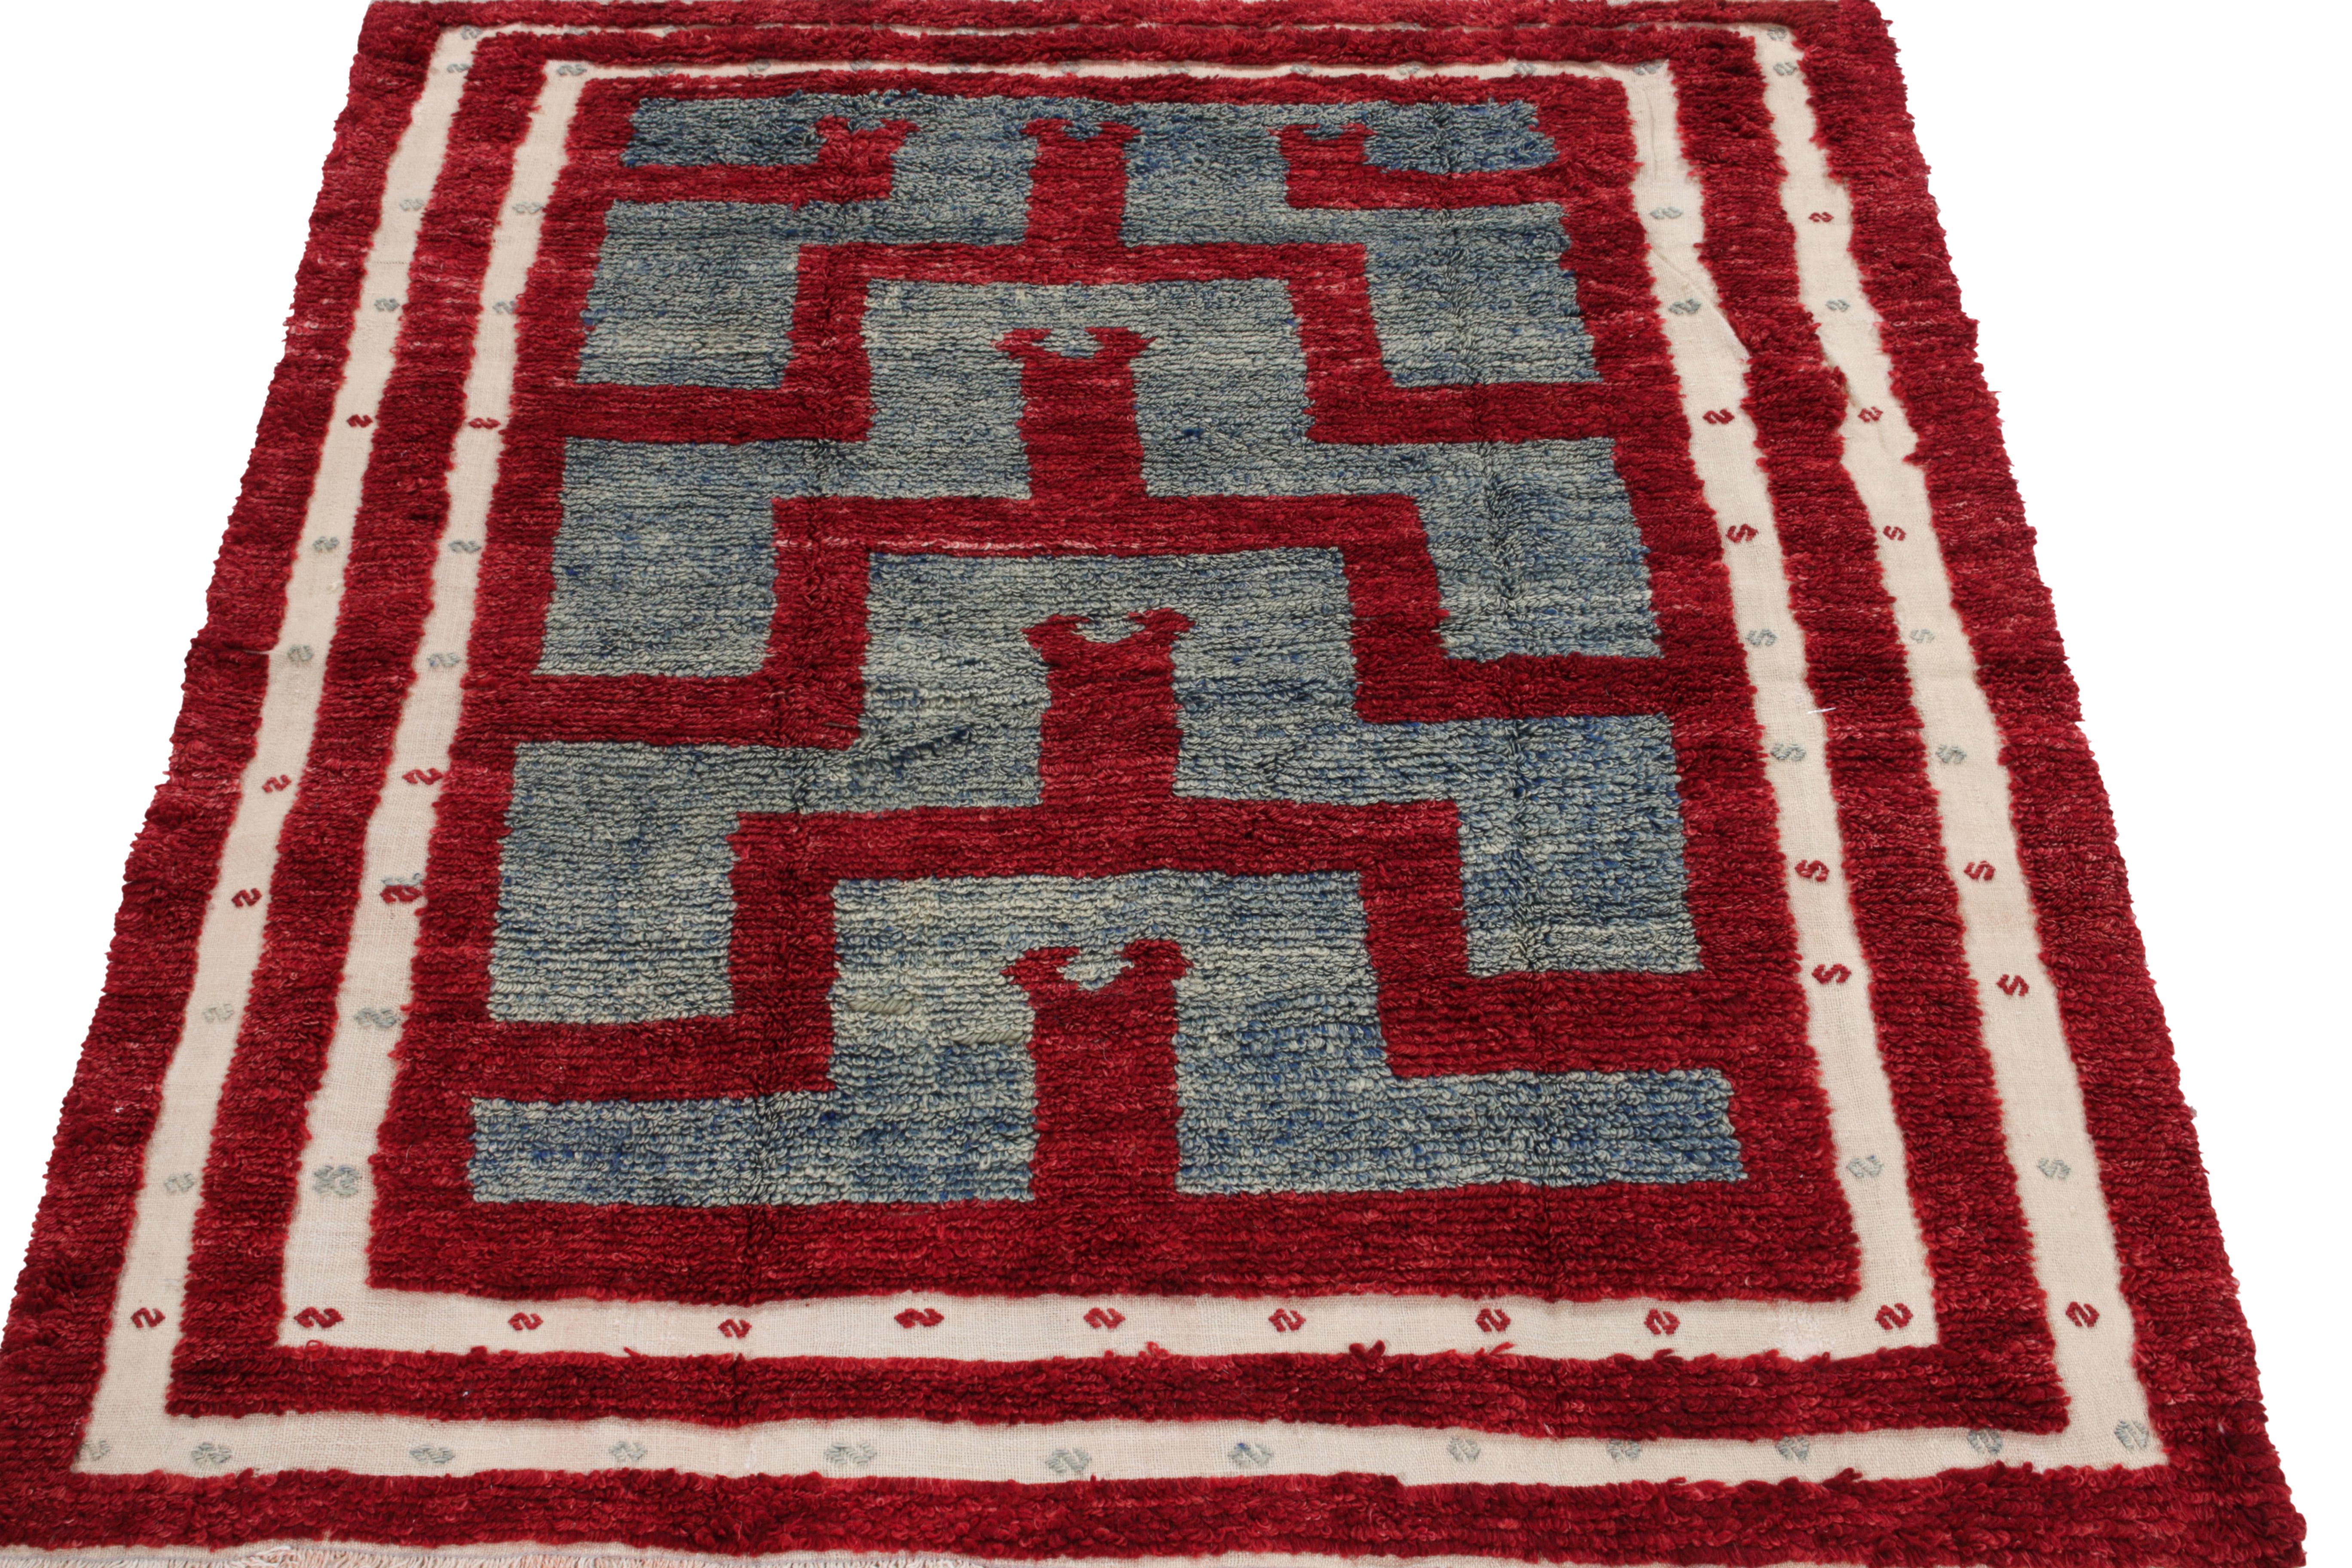 A spectacle of fine craftsmanship, this vintage 5x6 Tulu rug of the 1950s from our Antique & Vintage collection unveils sharp geometry in tribal designs bracing scarlet red & light blue tones. Connoisseurs may observe a delicate white border